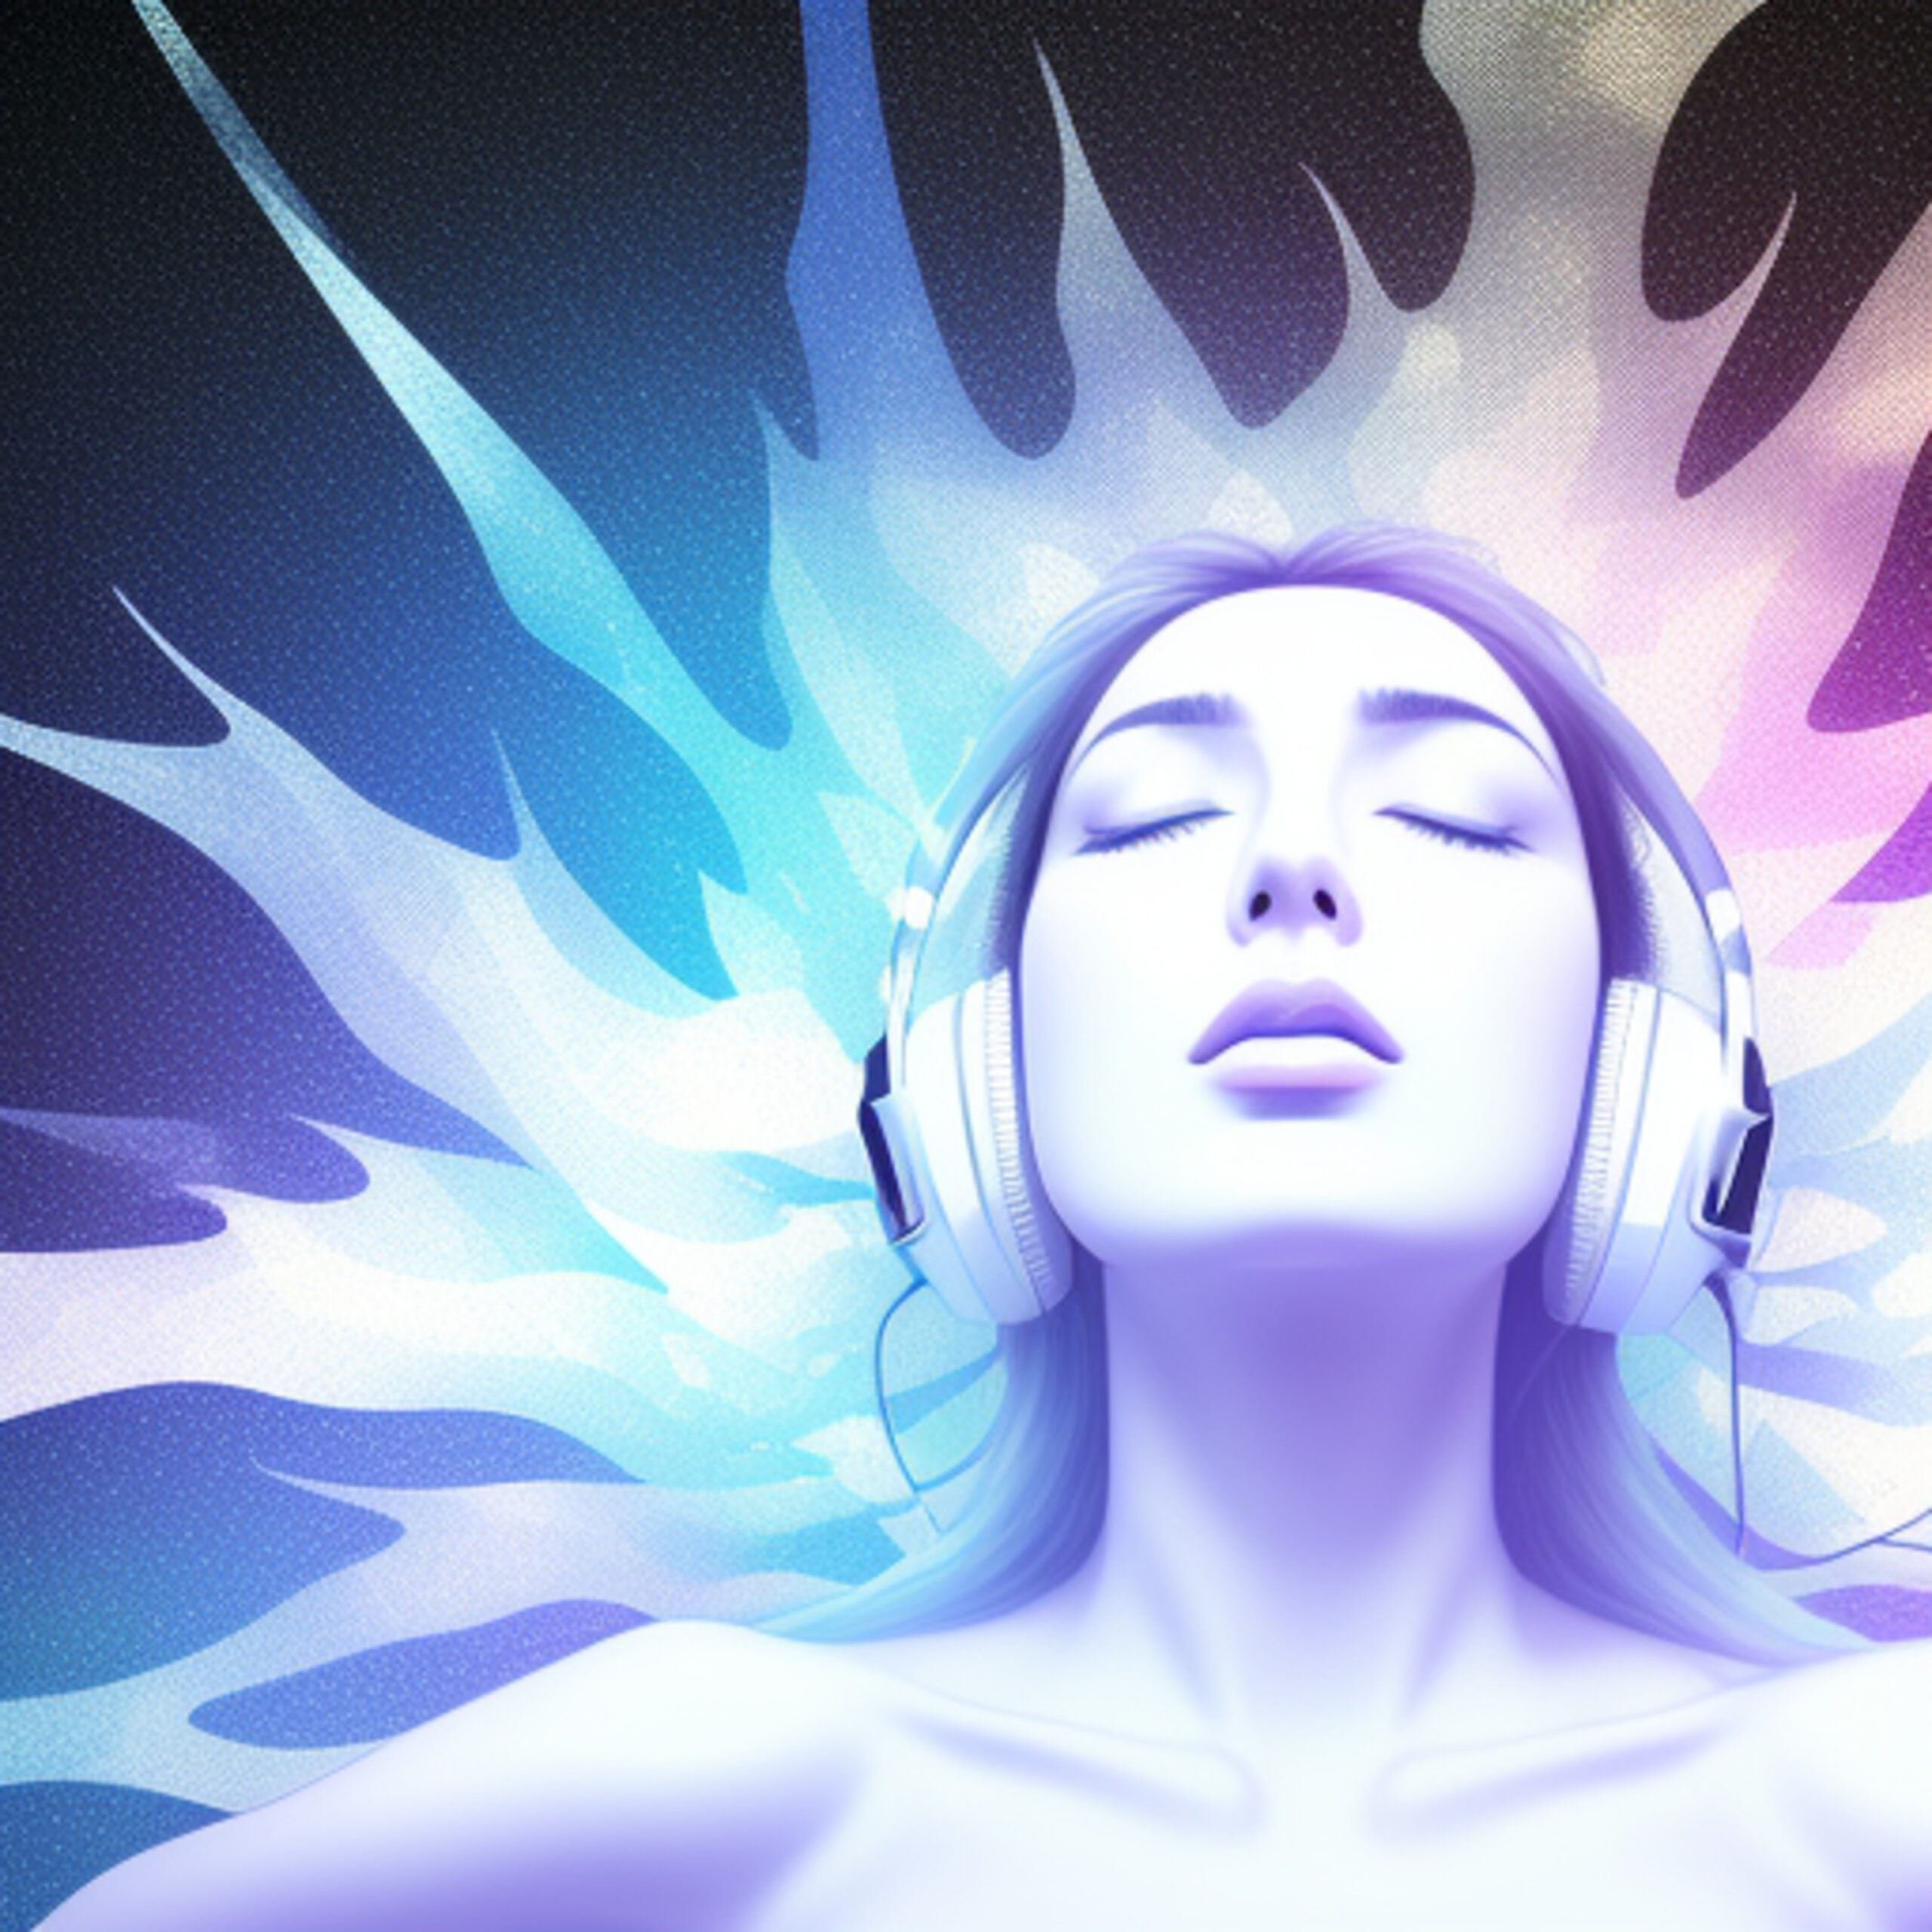 The Best Self-Hypnosis Audio For Inducing A Trance